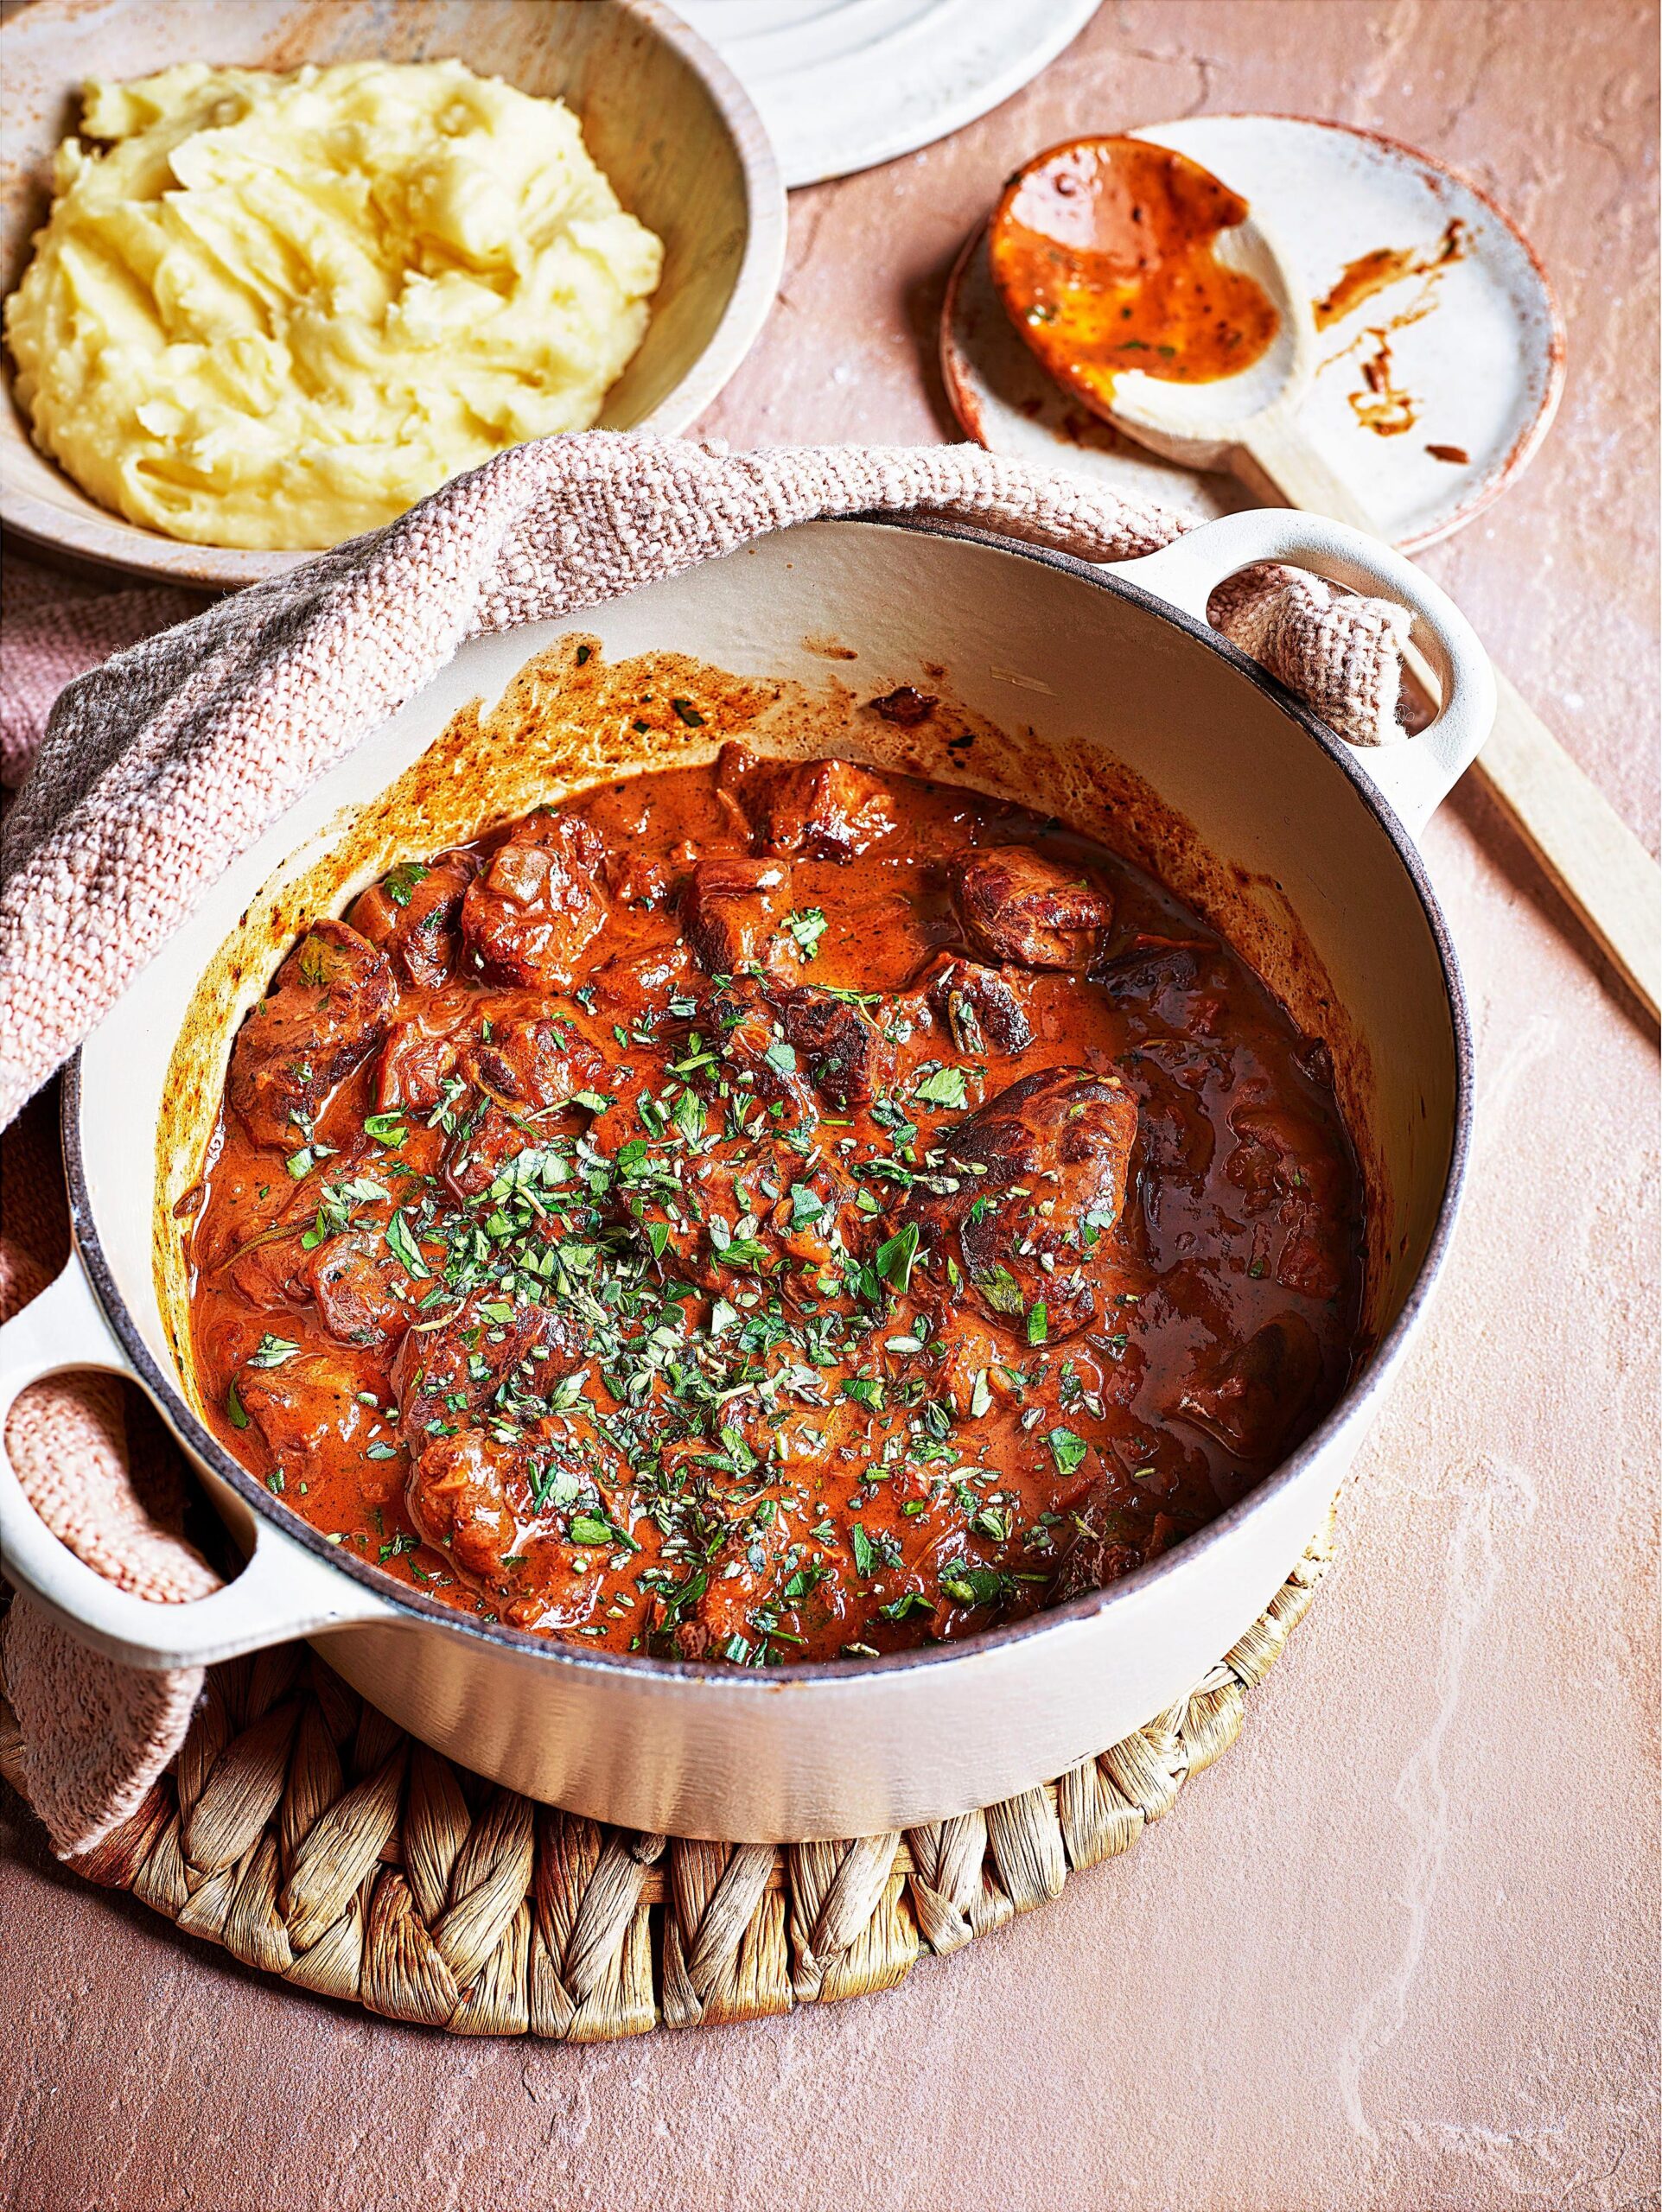  Take your taste buds on a journey with a dish that's both hearty and sophisticated - stewing beef braised in red wine.